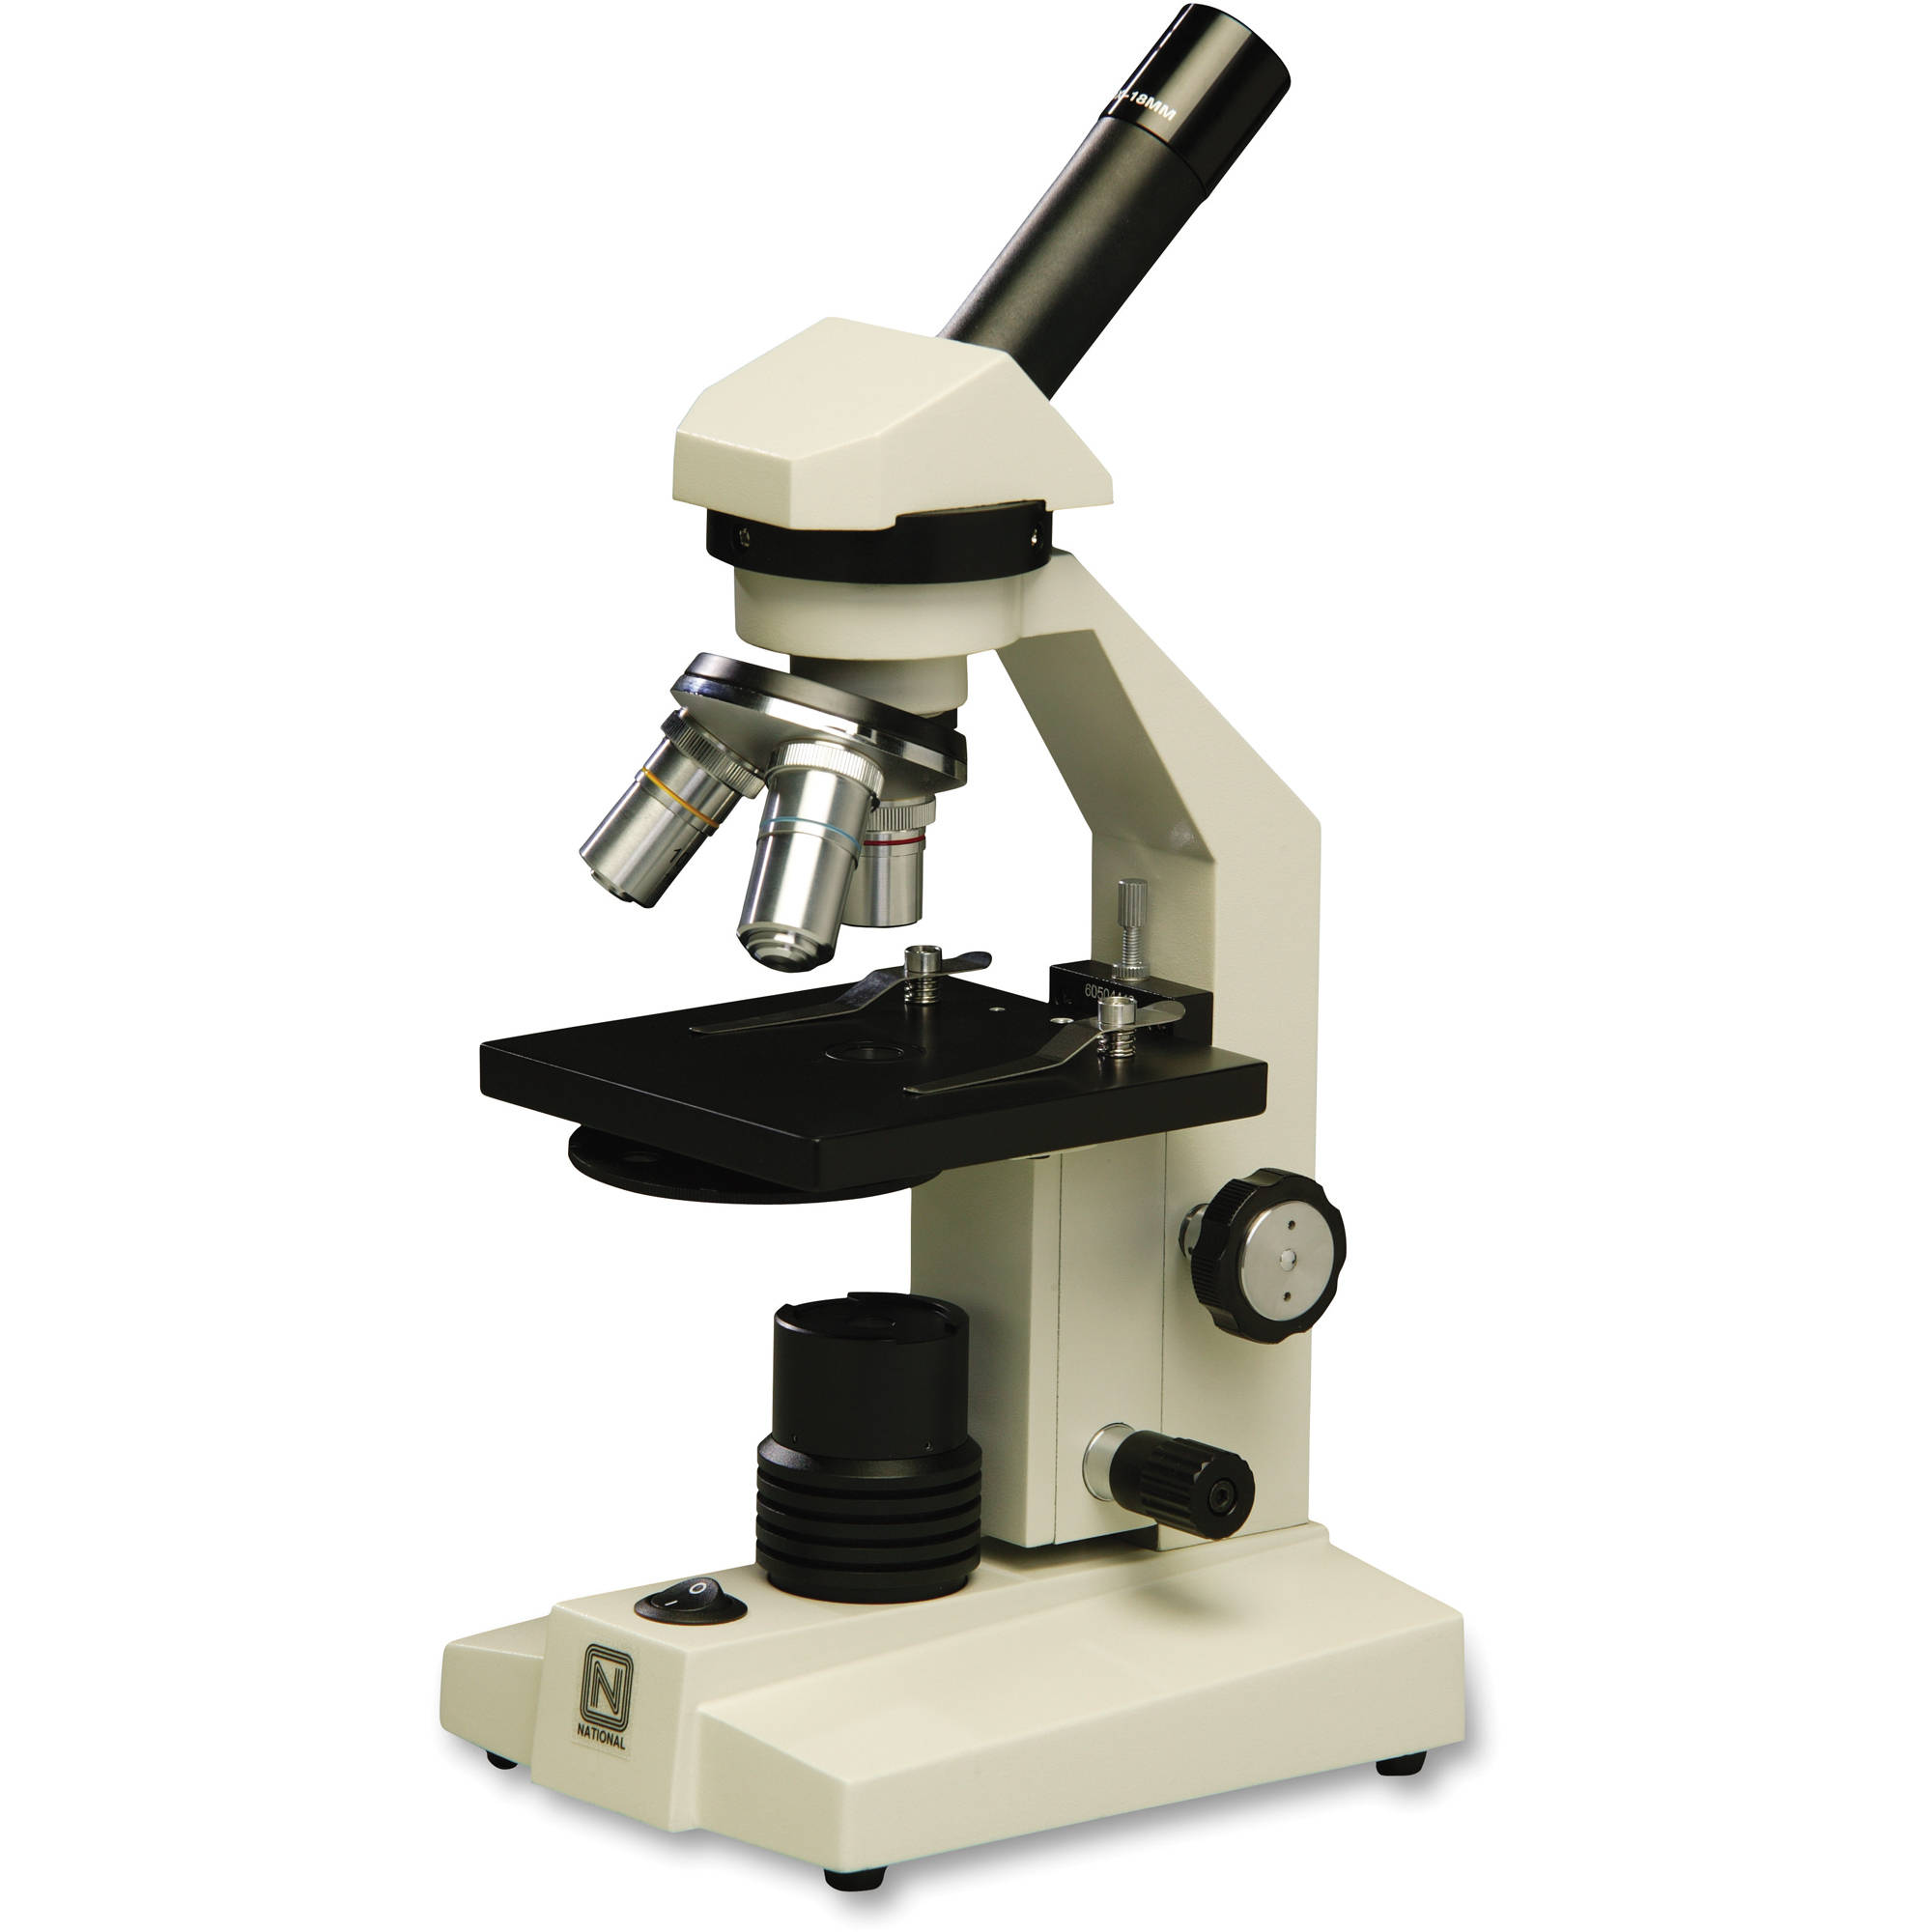 National Model 131-CLED Compound Microscope 131-CLED B&H Photo